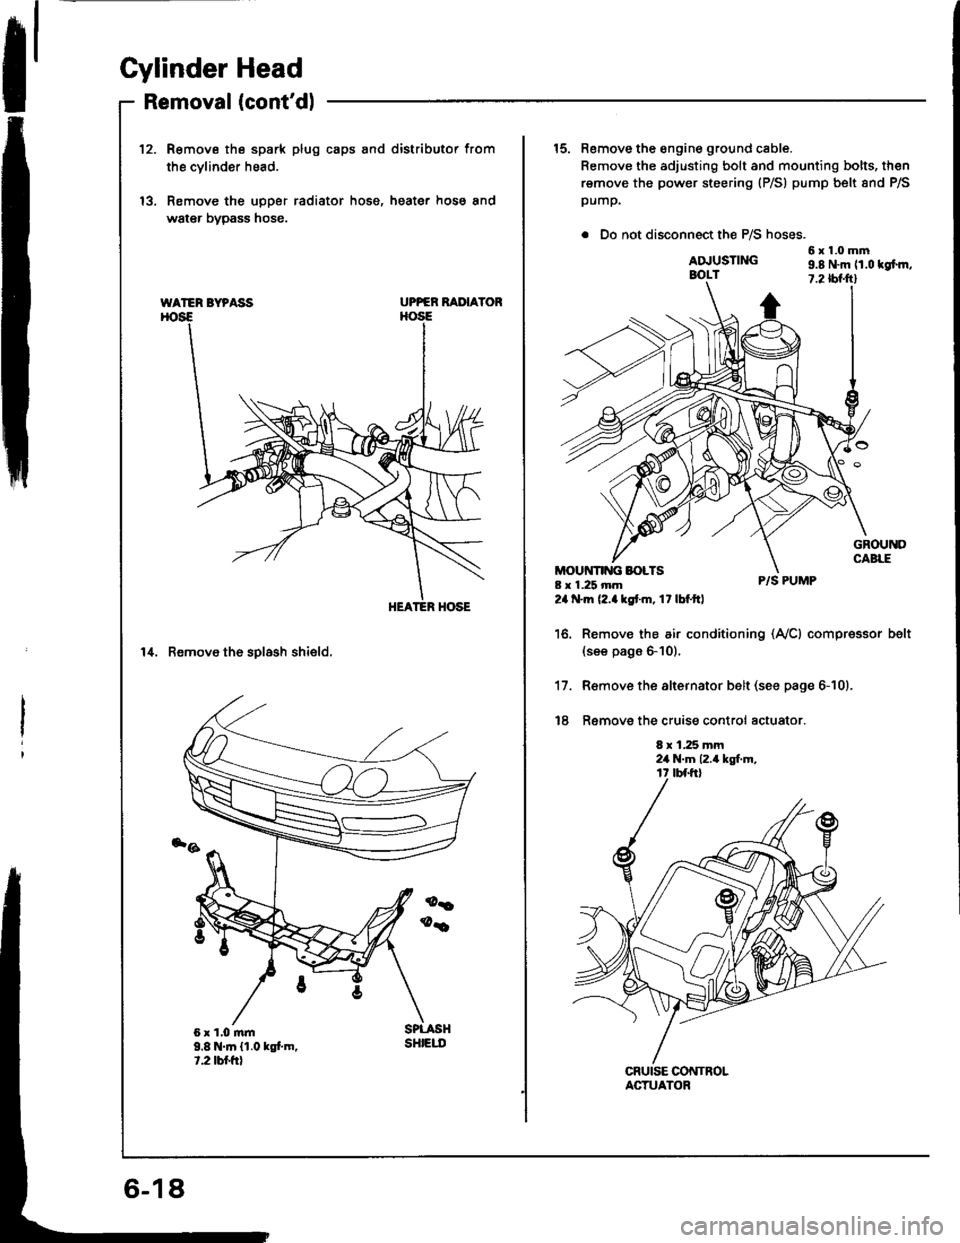 ACURA INTEGRA 1994  Service Repair Manual Cylinder Head
Removal (contdlI
12.R€move the spark plug caps and distributor from
the cvlinder head.
Remove the upper radiator hose, heater hose and
water bypass hose.
UPPER RAIIAYOR
14. Remove th